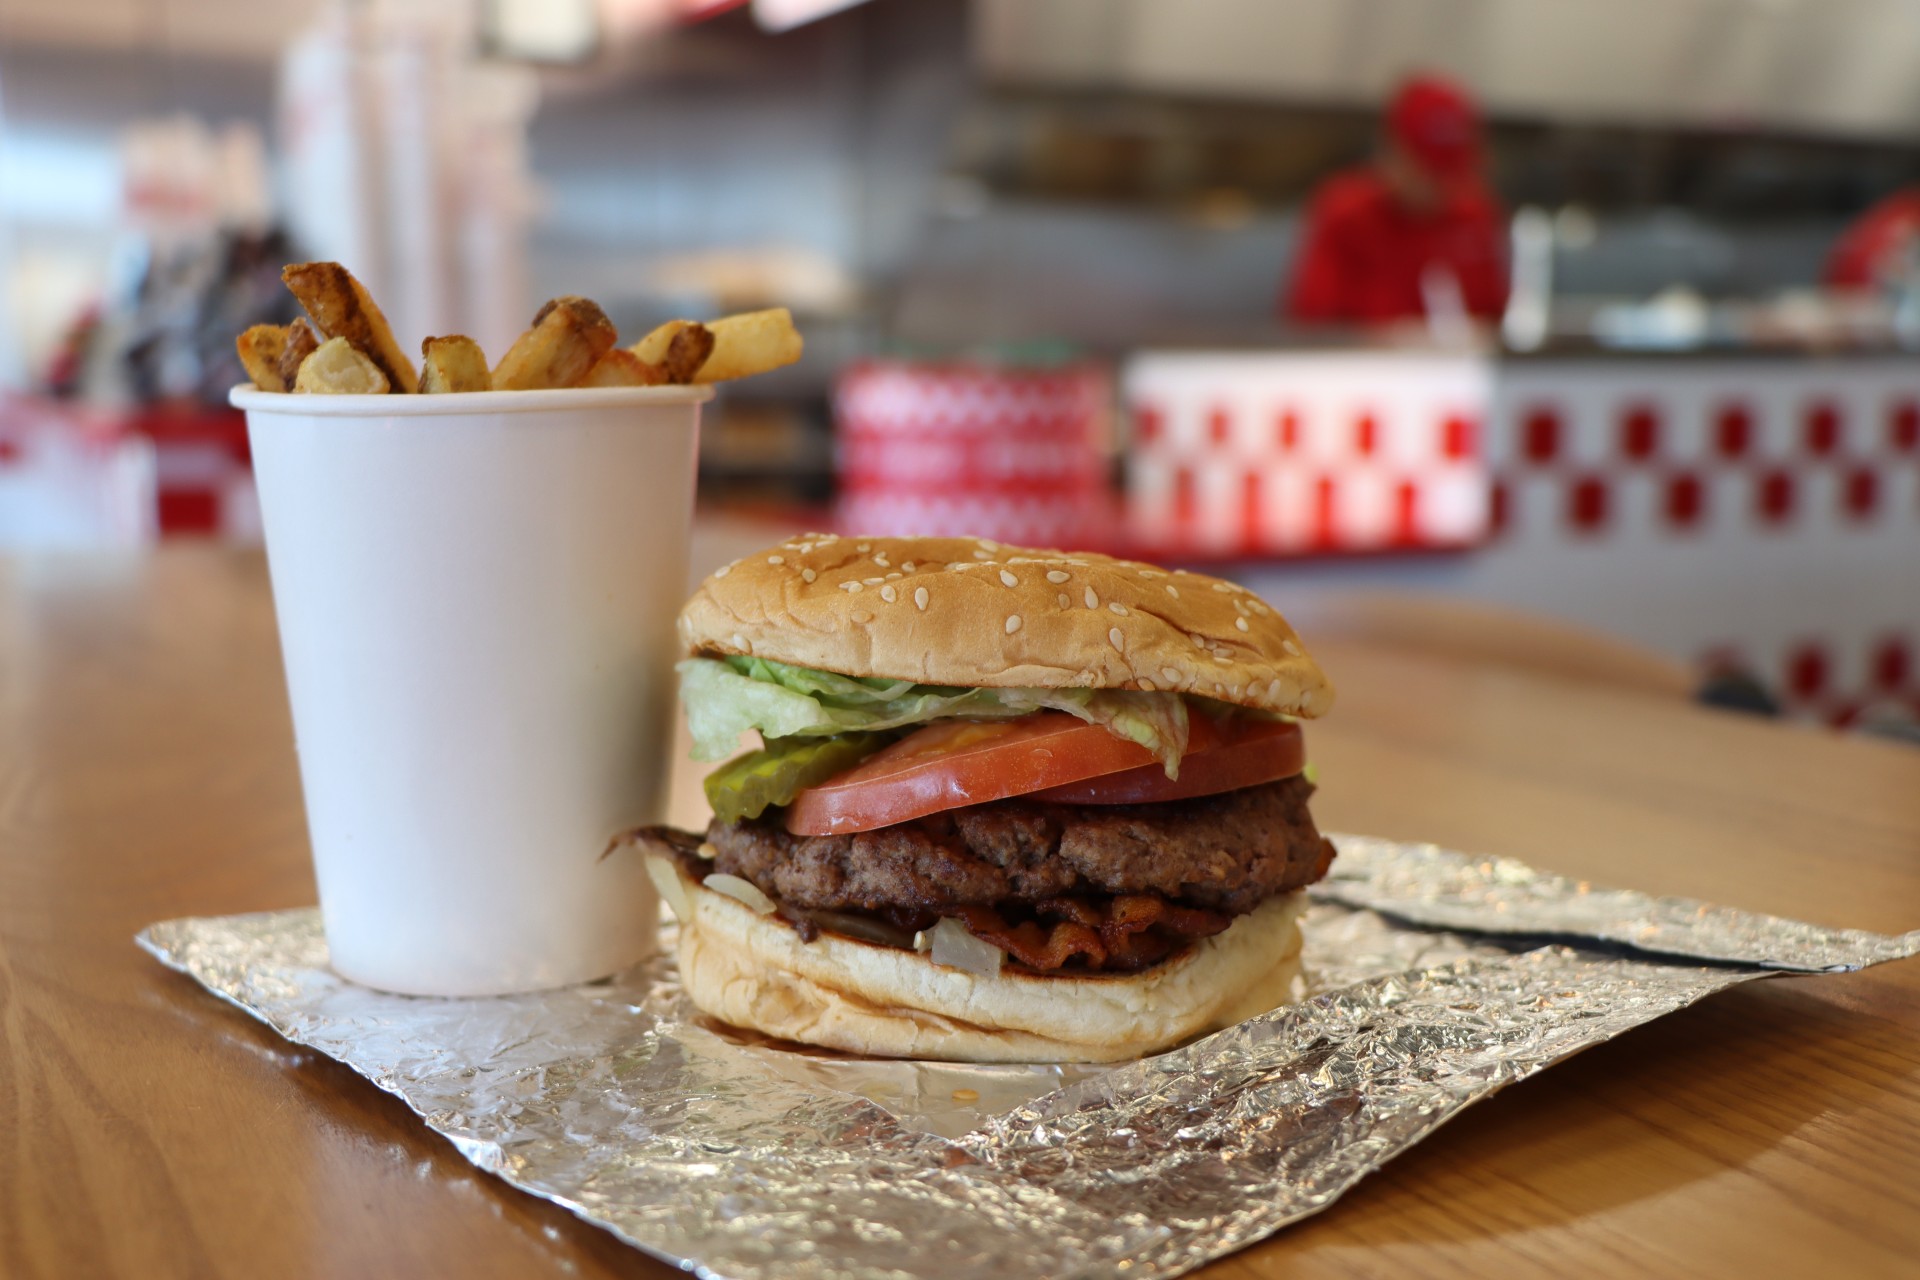 Three new chain restaurants to debut in Central Ohio – 614NOW